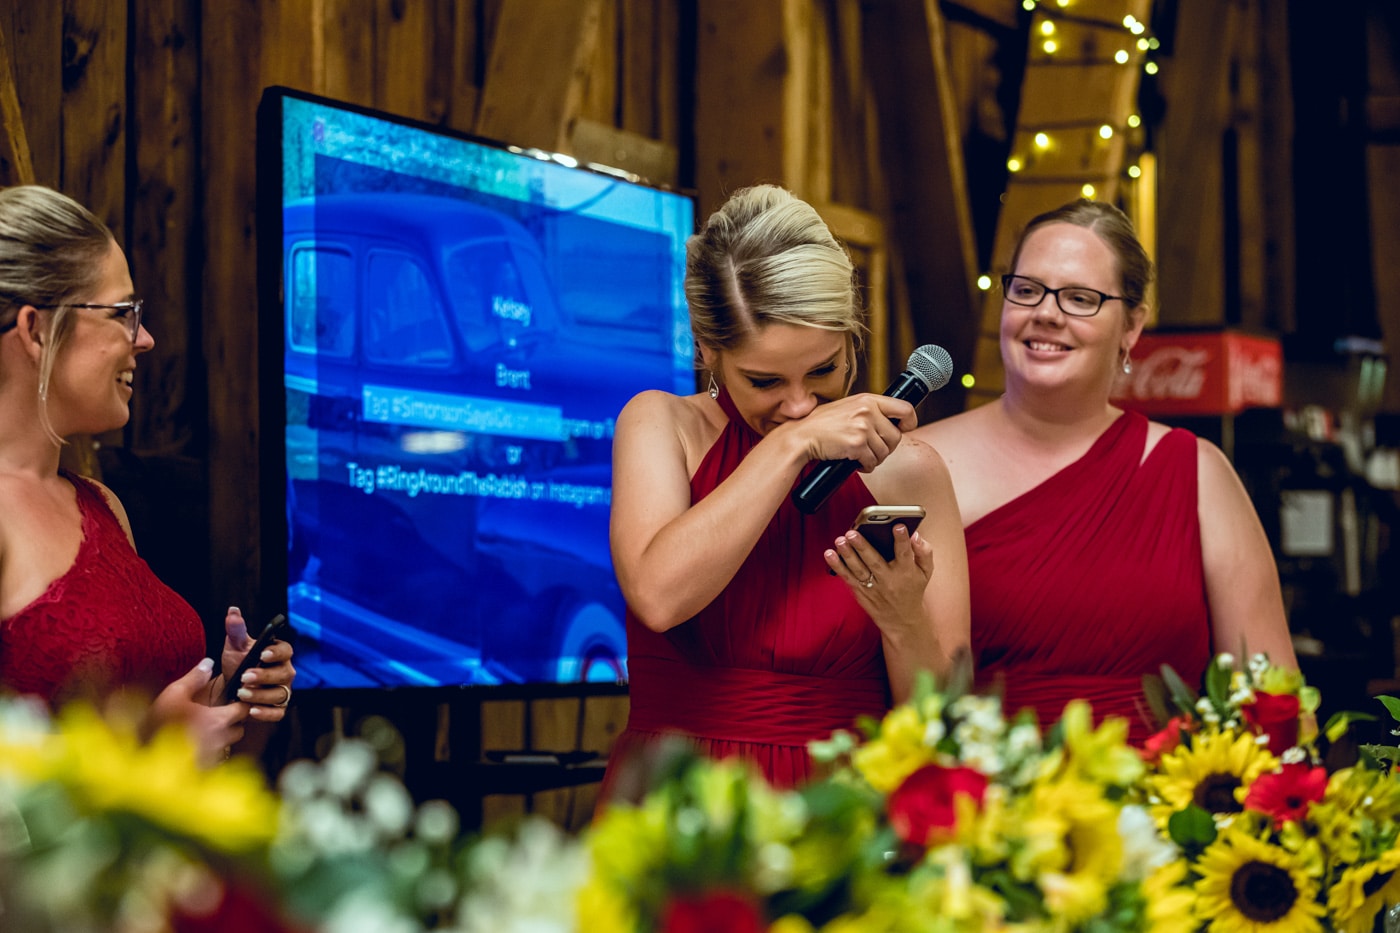 Maid of honor emotion for speech at reception